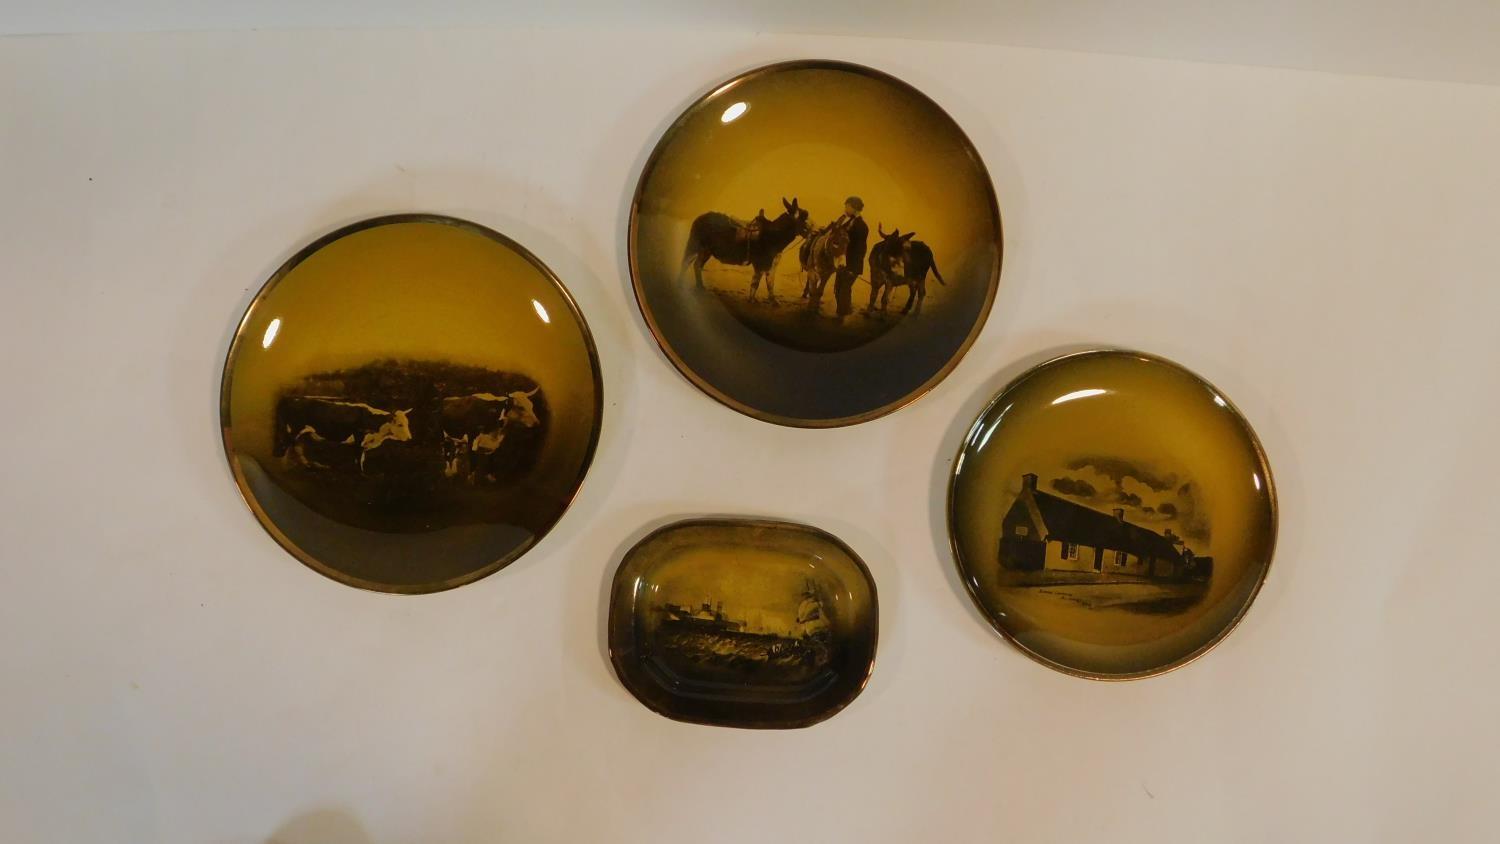 A collection of four Royal Vista Ware Ridgeways 'Paintings by famous artists' ceramic plates. One